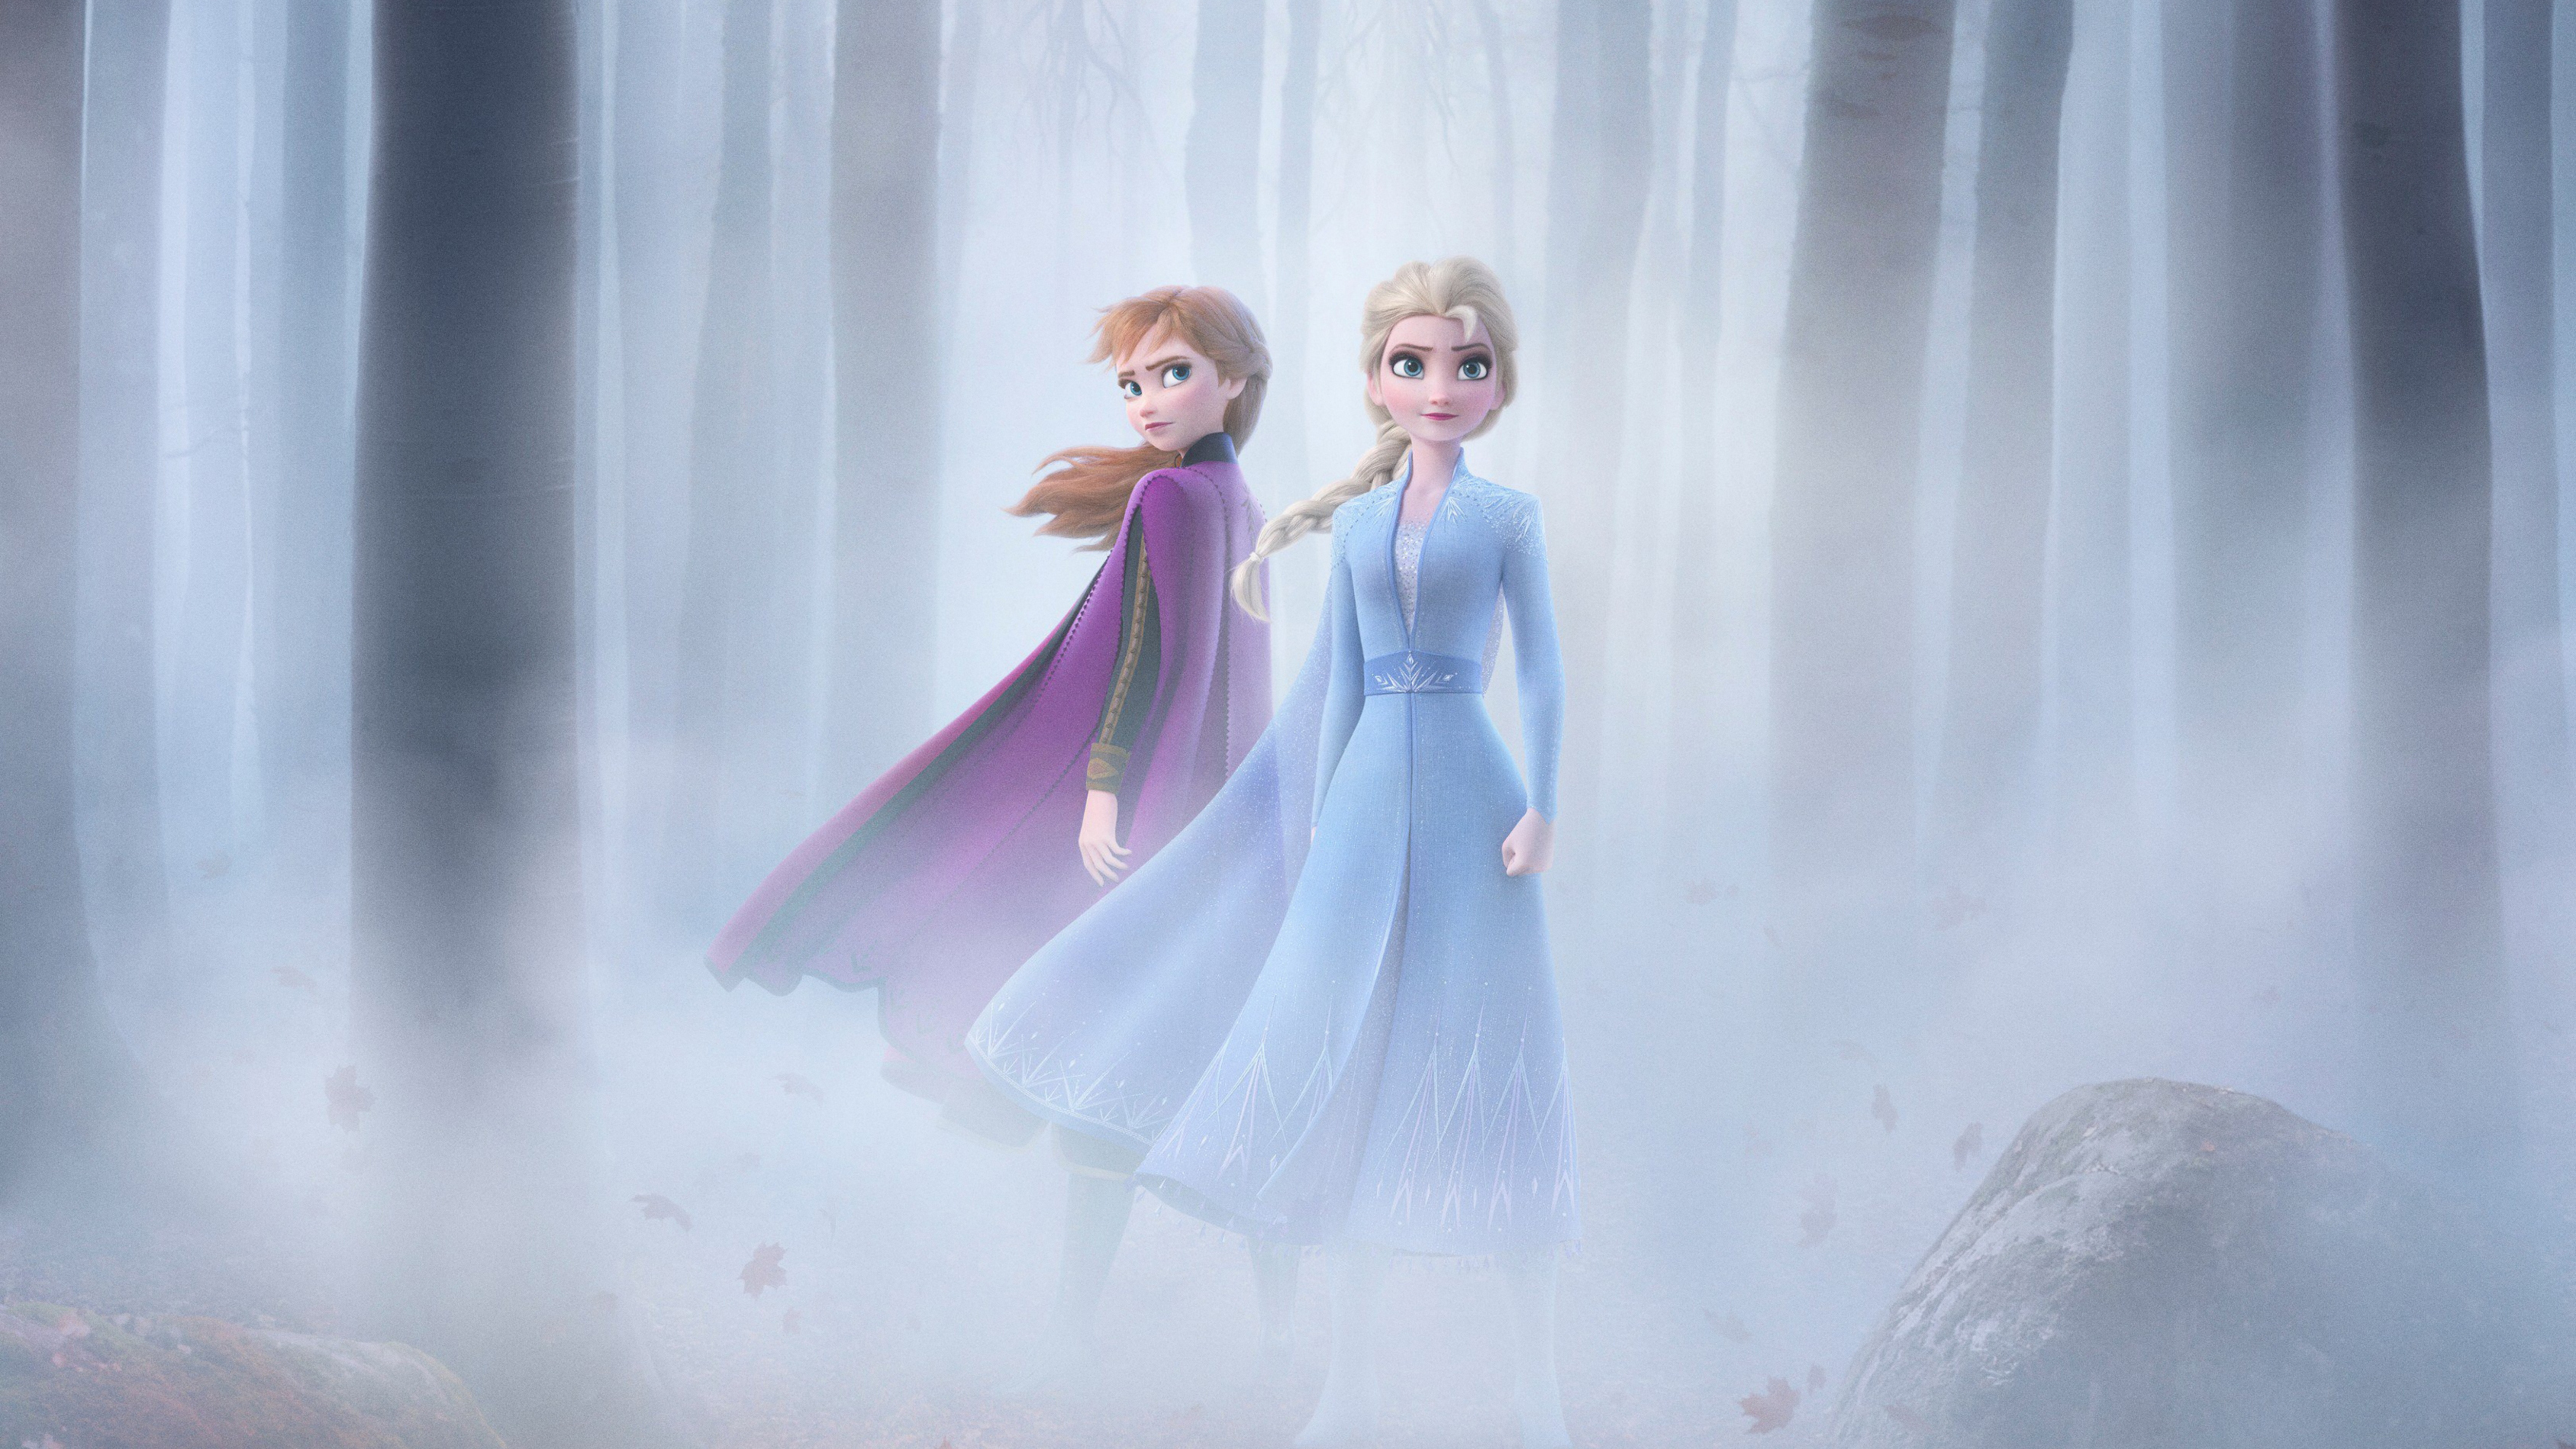 Anna And Elsa In Frozen 2 4k, HD Movies, 4k Wallpapers, Images, Backgrounds,  Photos and Pictures